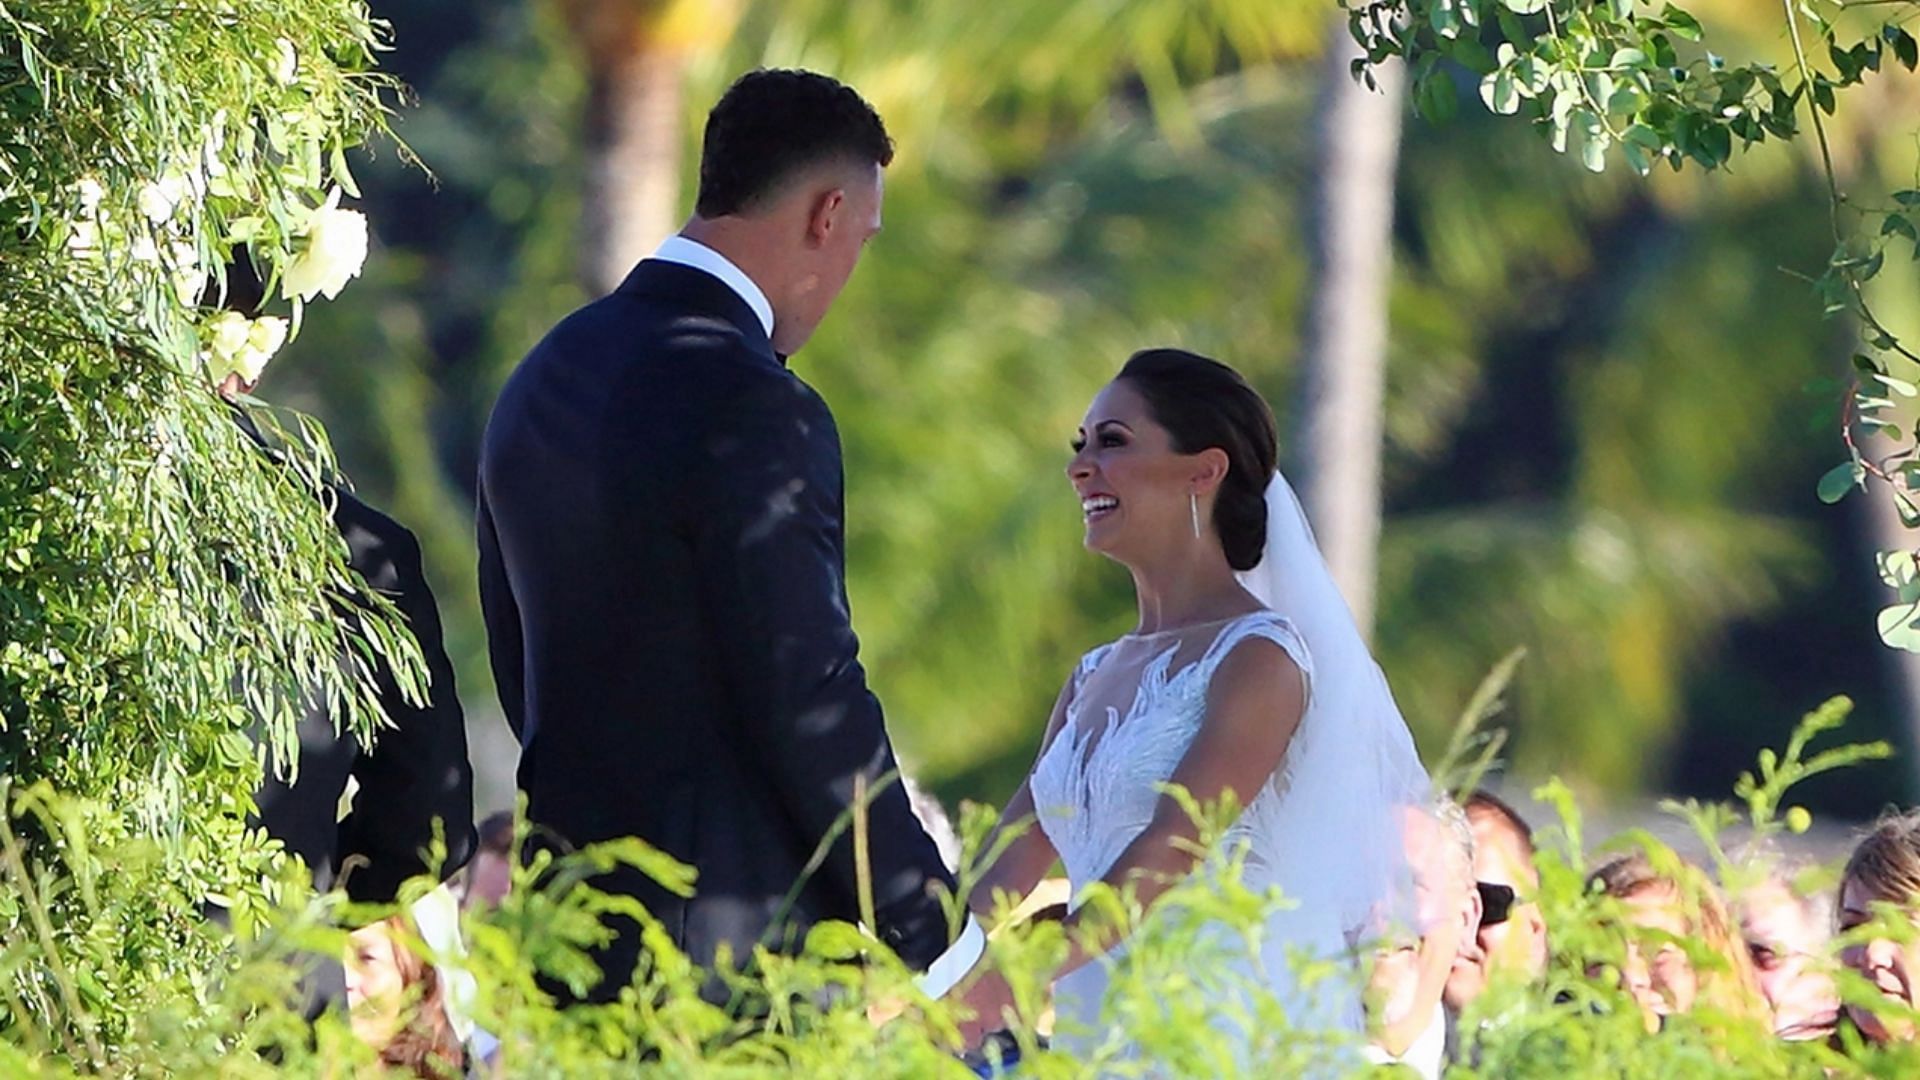 Facts About Aaron Judge's Wife Samantha Bracksieck